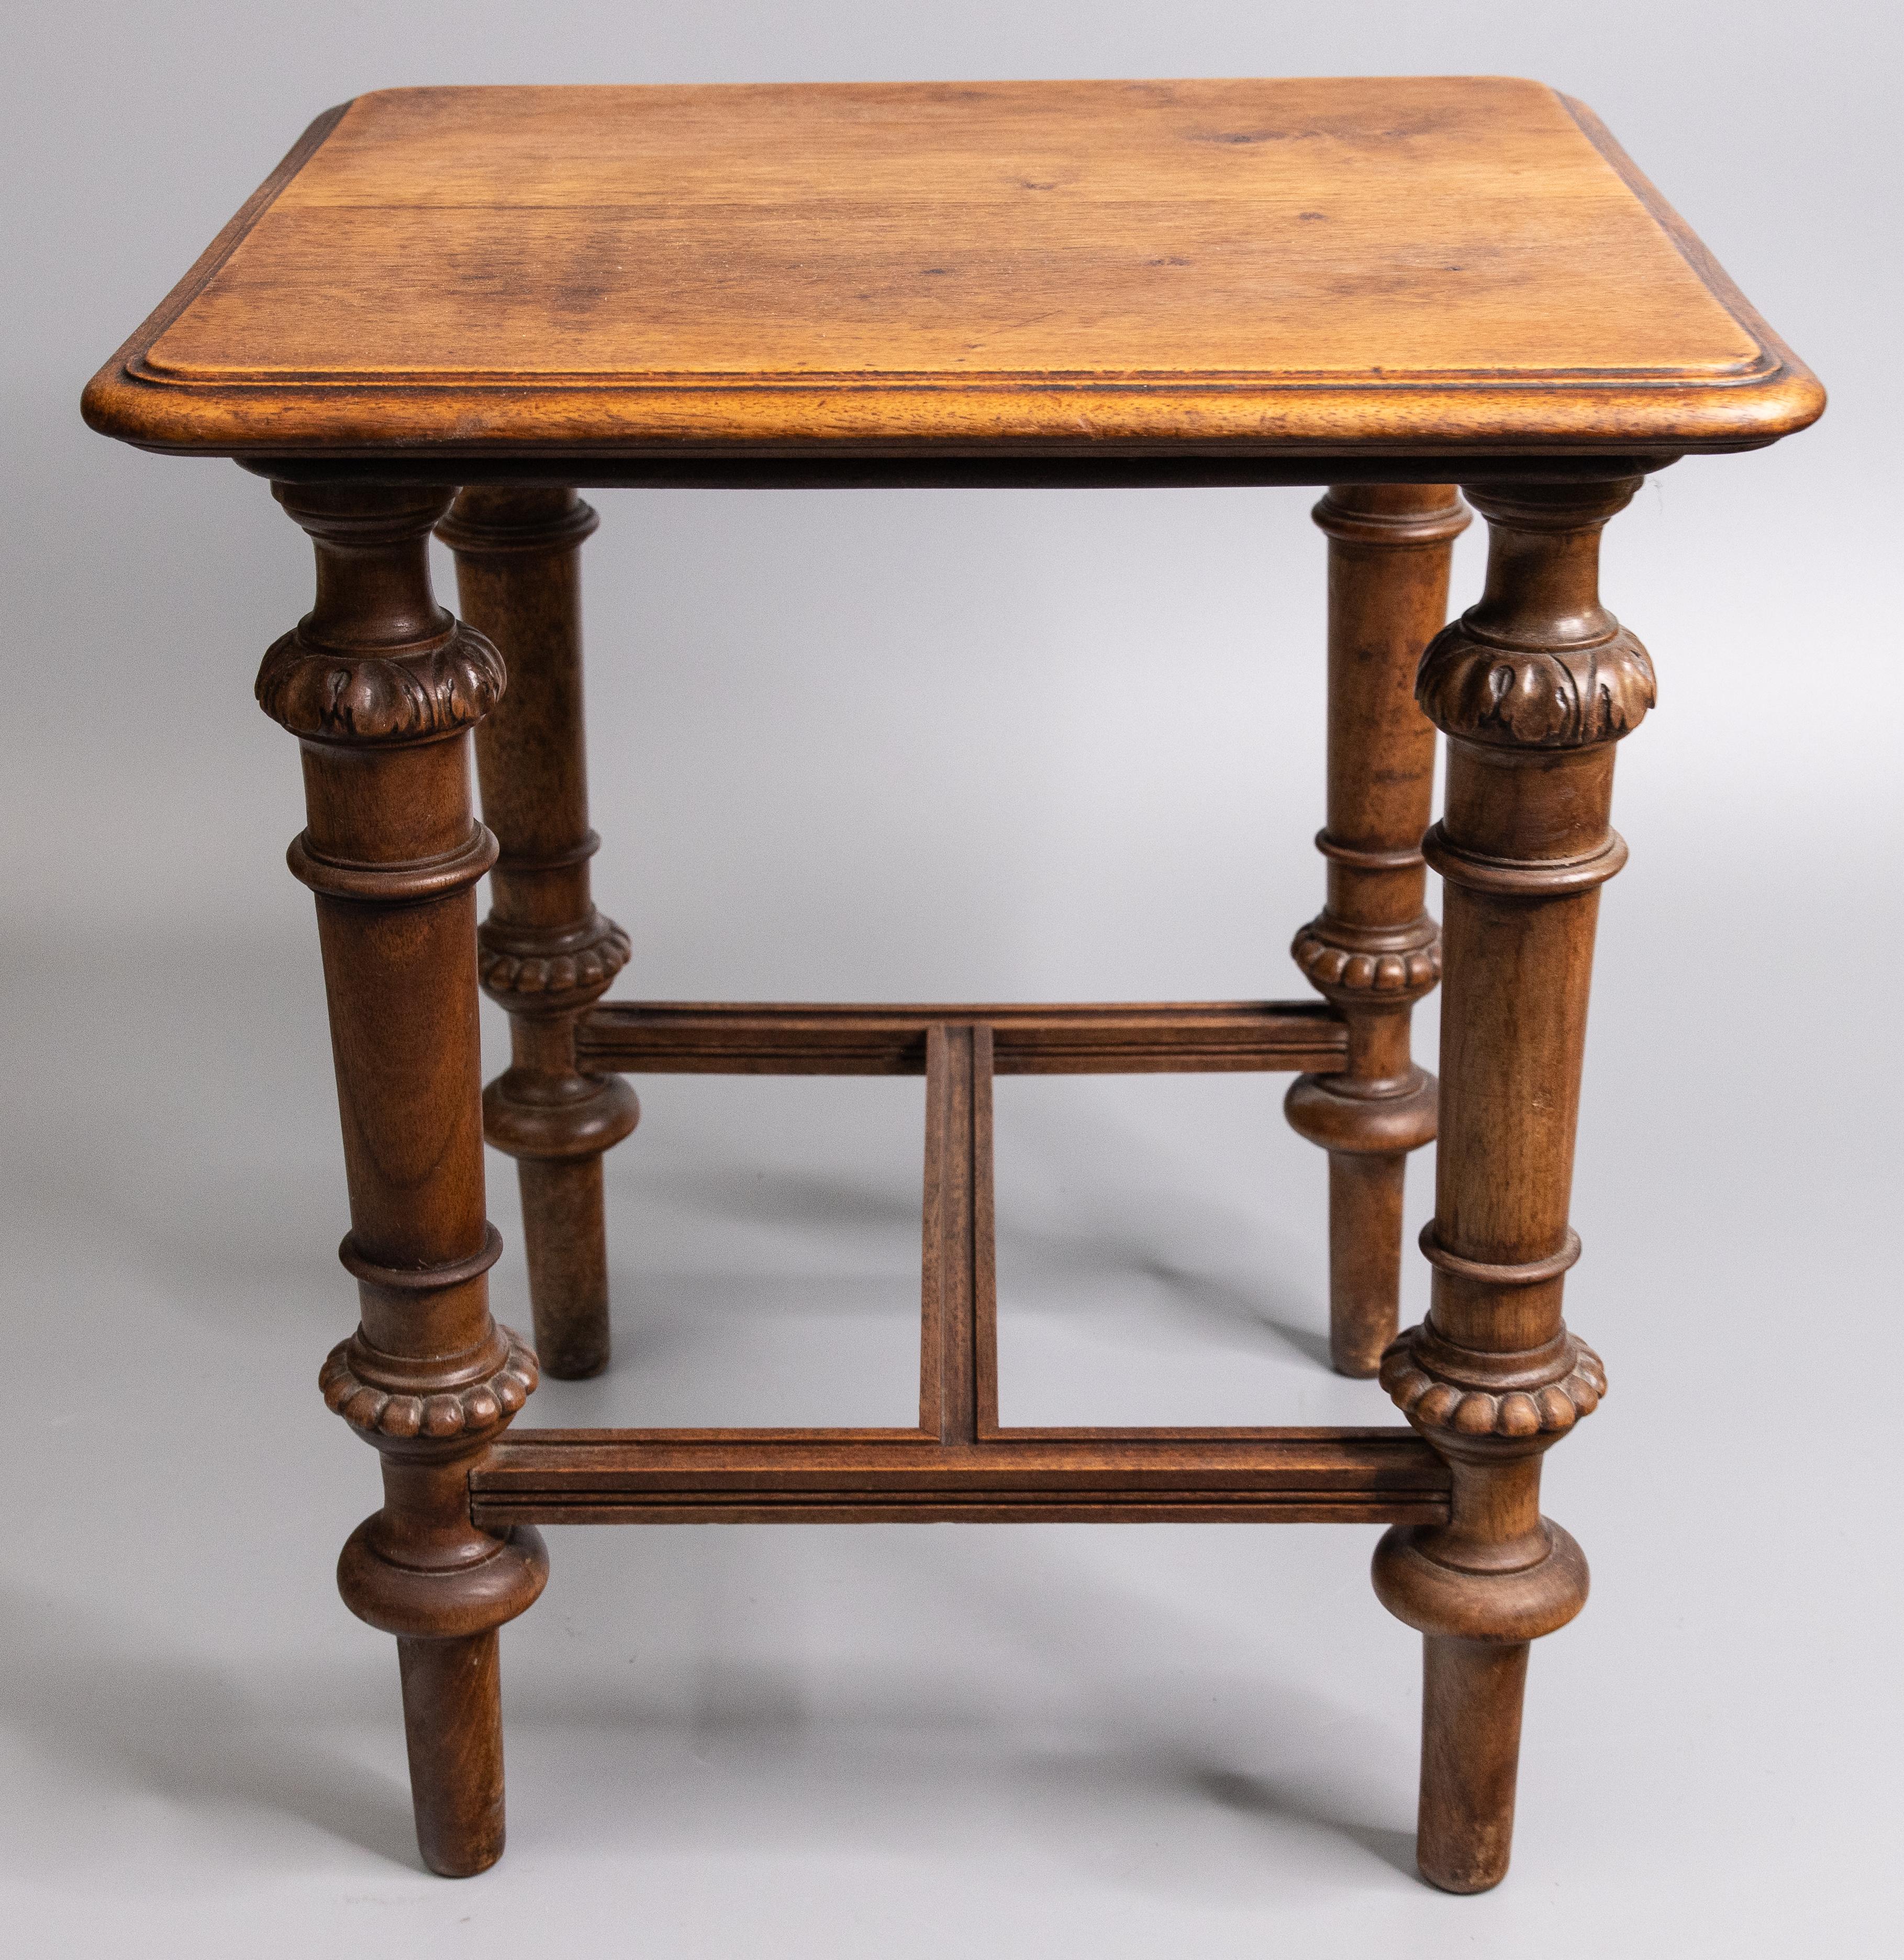 19th Century French Oak Carved Side Table Low Stool Footstool In Good Condition For Sale In Pearland, TX